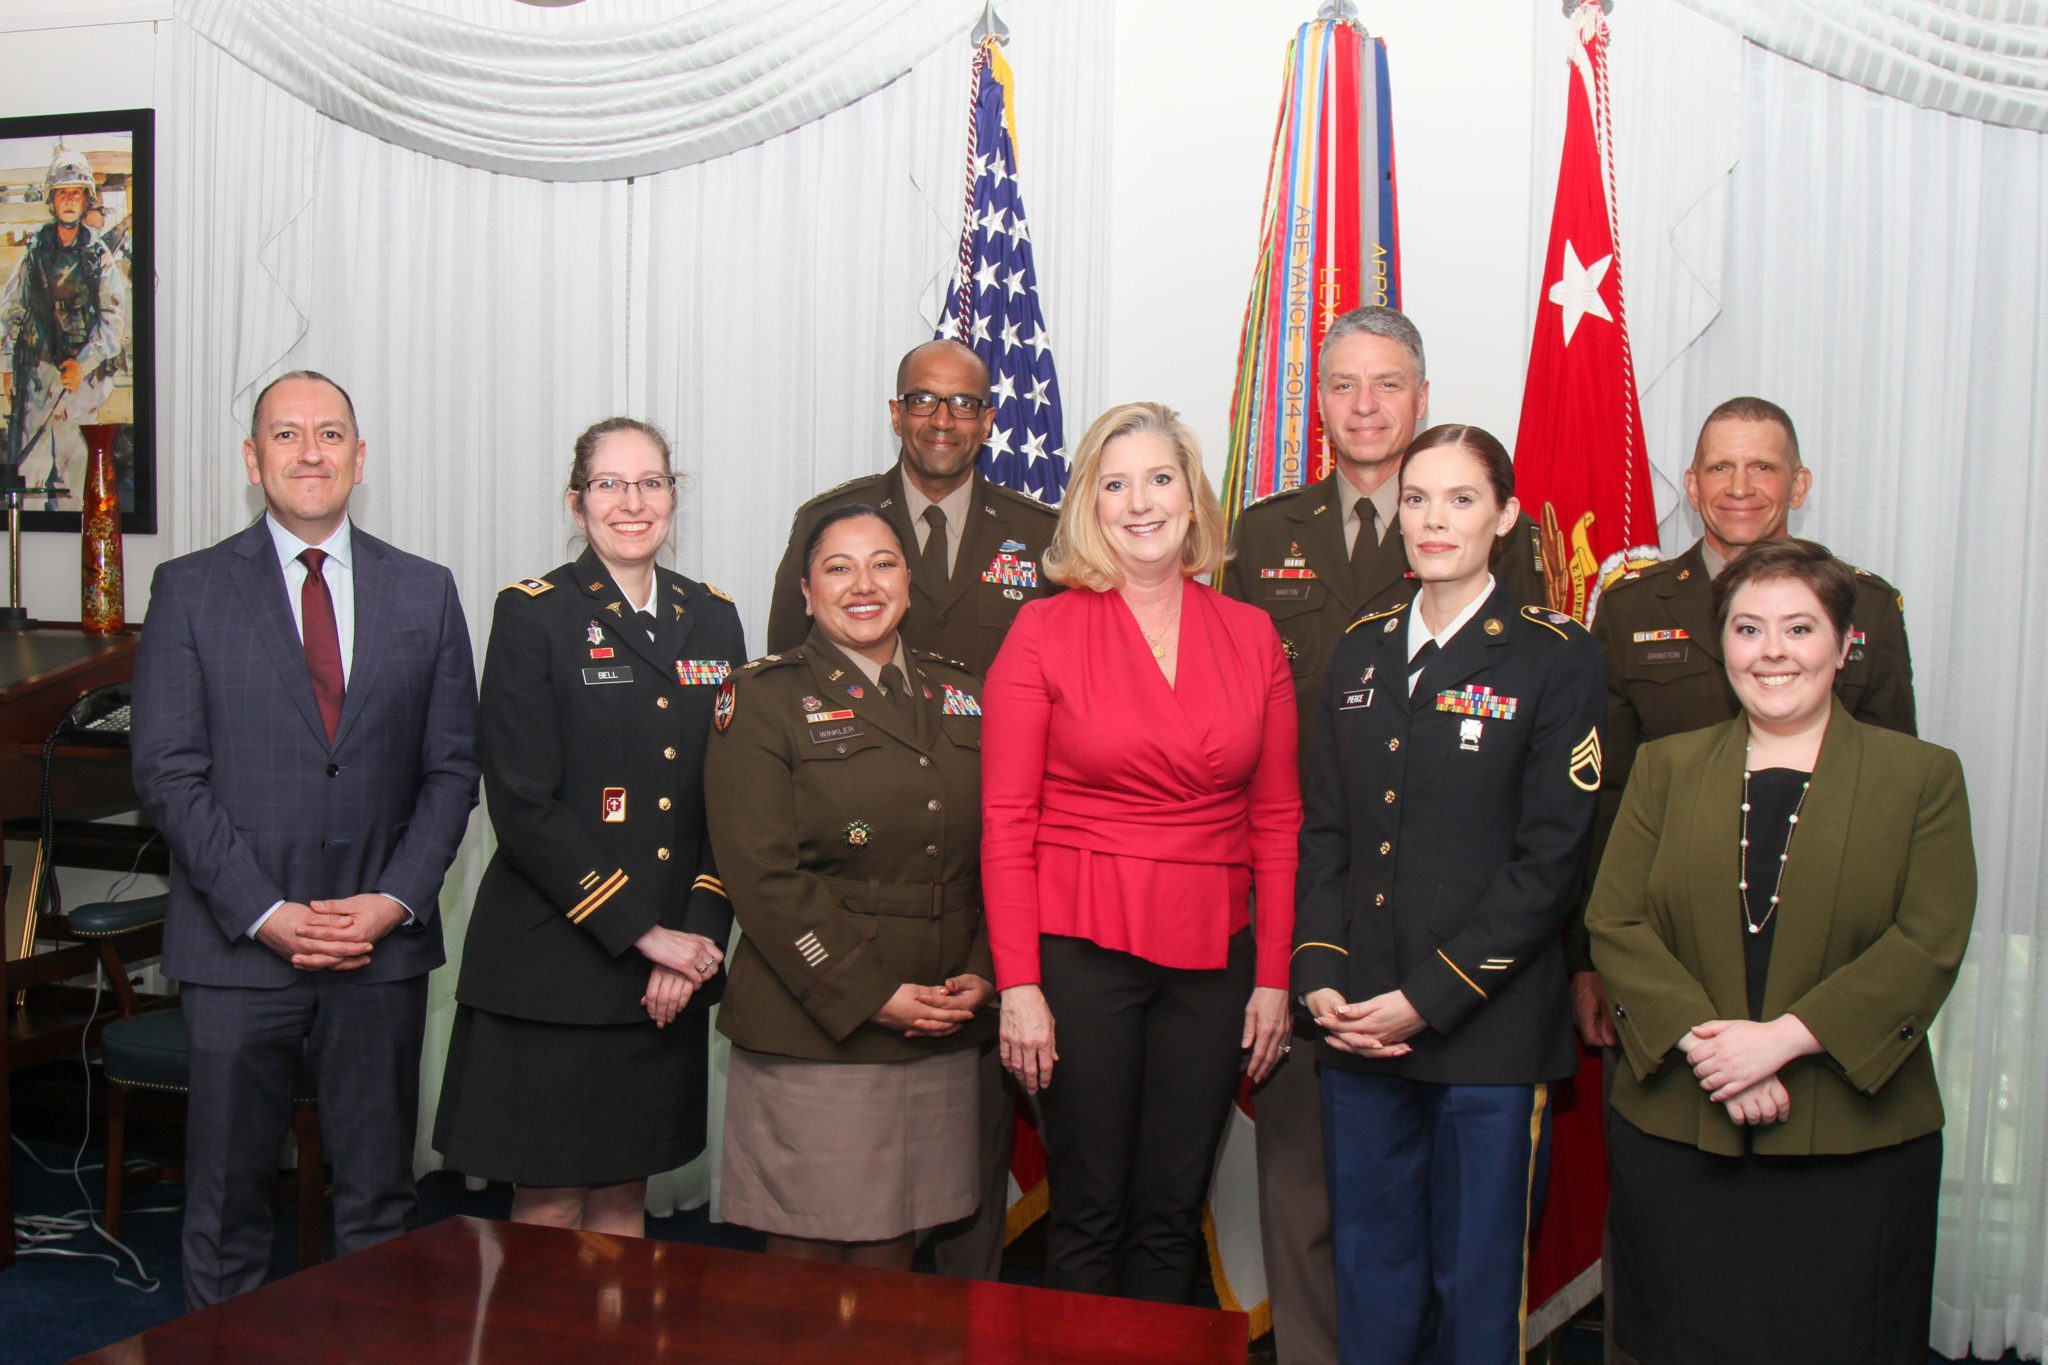 Army senior leaders join policy contributors from across the force to sign the Parenthood, Pregnancy and Postpartum Army directive on April 19, 2022 at the Pentagon. Pictured from left to right first row: Gabriel Camarillo, Undersecretary of the Army; Lt. Col Kelly Bell; Maj. Sam Winkler; Christine E. Wormuth, Secretary of the Army; Staff Sgt. Nicole Pierce; Amy Kramer. Second row from left to right: Lt. Gen. Gary Brito, Army G-1; Gen. Joseph M. Martin, vice chief of staff of the Army; Command Sgt. Maj. Michael Grinston, sergeant major of the Army. (Staff Sgt. Tae Harrison)